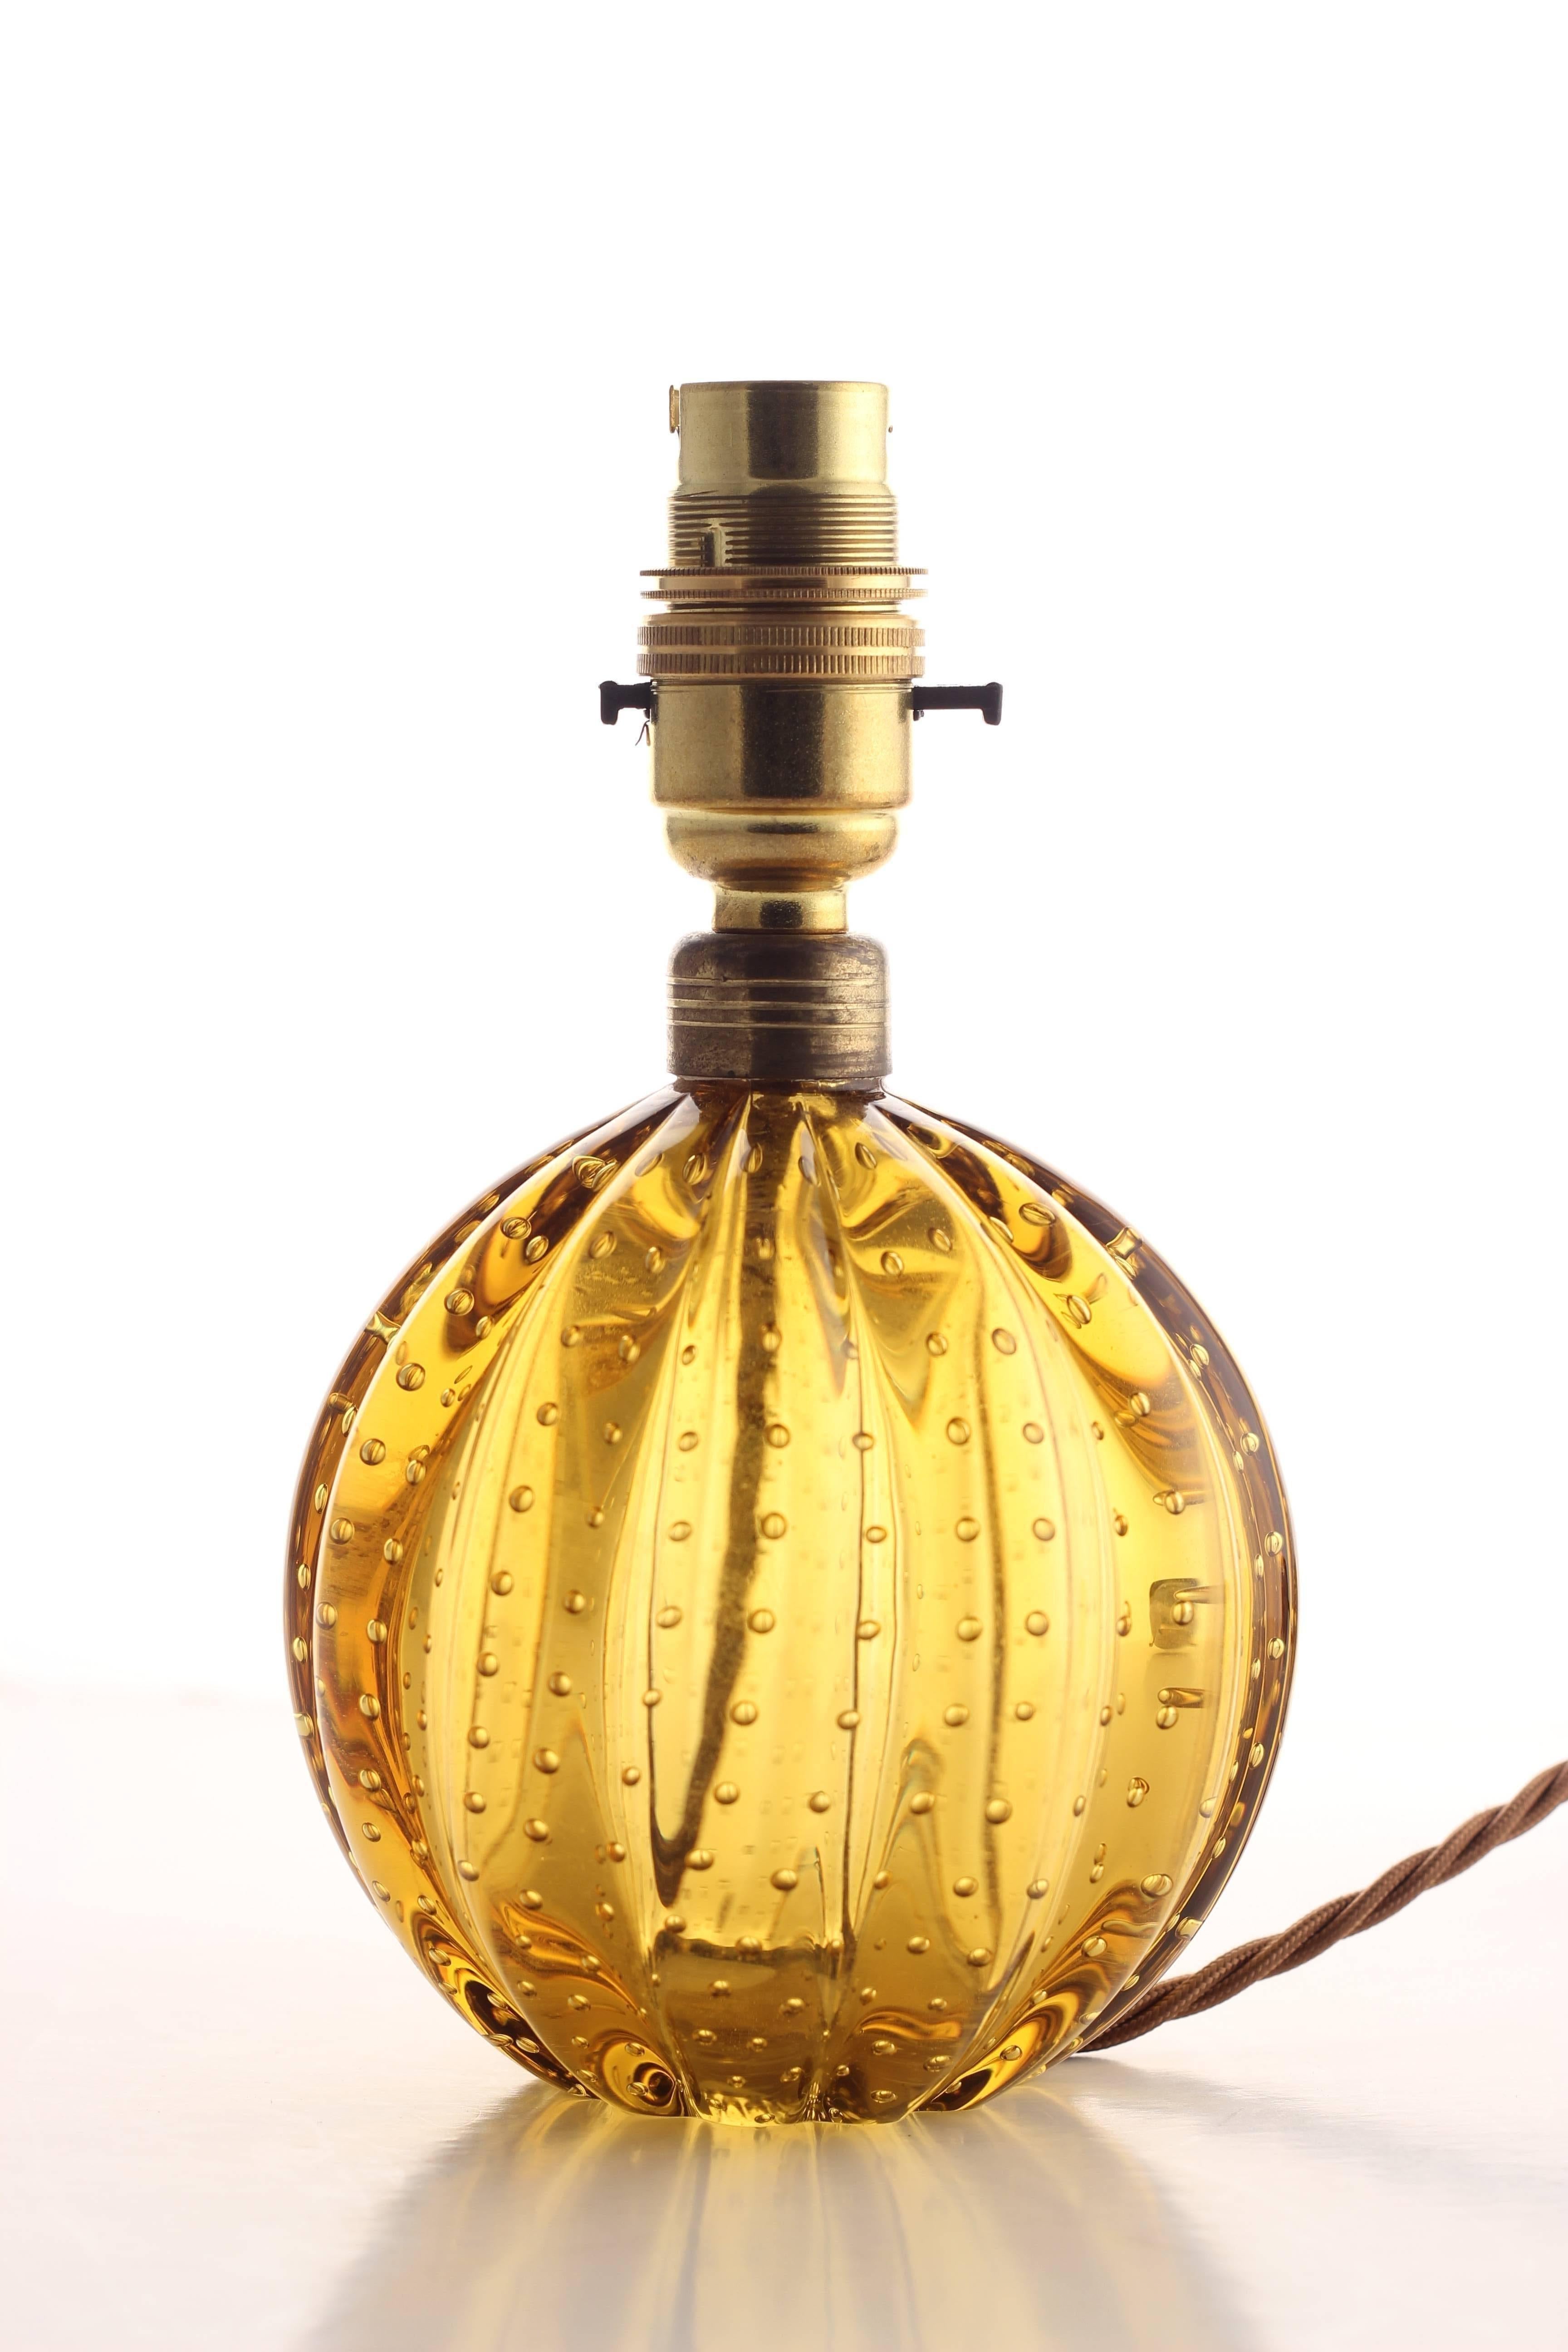 Deep vintage gold bullicante ribbed globe lamp by Archimede Seguso, Murano, Venezia, Italy, 1950s. No chips or cracks. Rewired with vintage gold colored braided rayon cord. Can be very easily converted and rewired for USA, European etc electrical